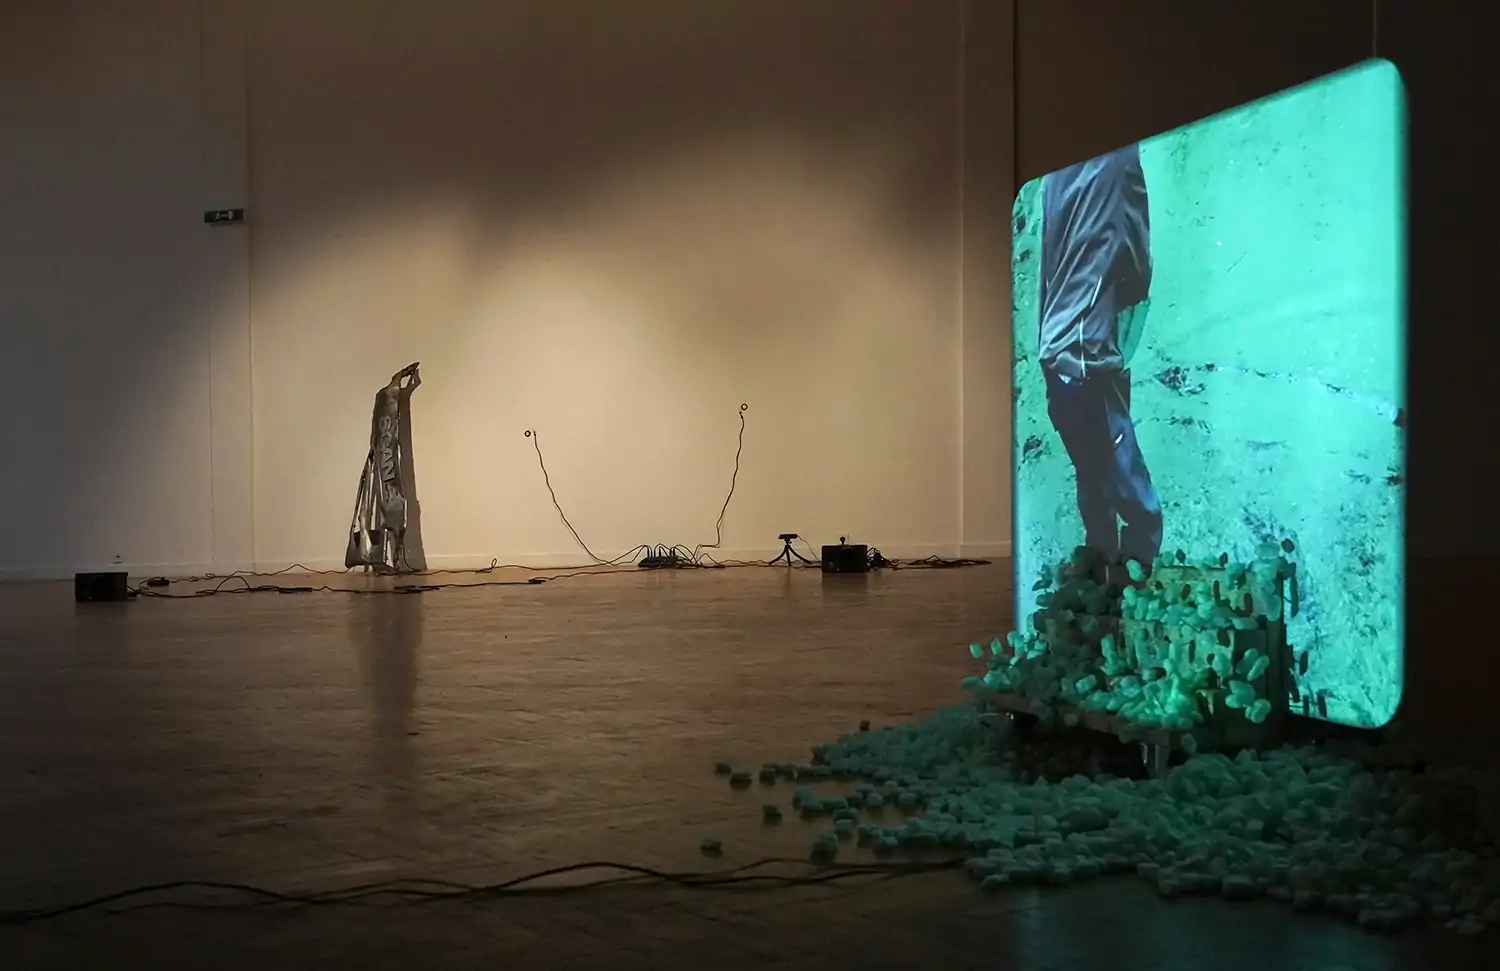 Mario_Asef Exhibition in Poland, with video and sound installation of found objects